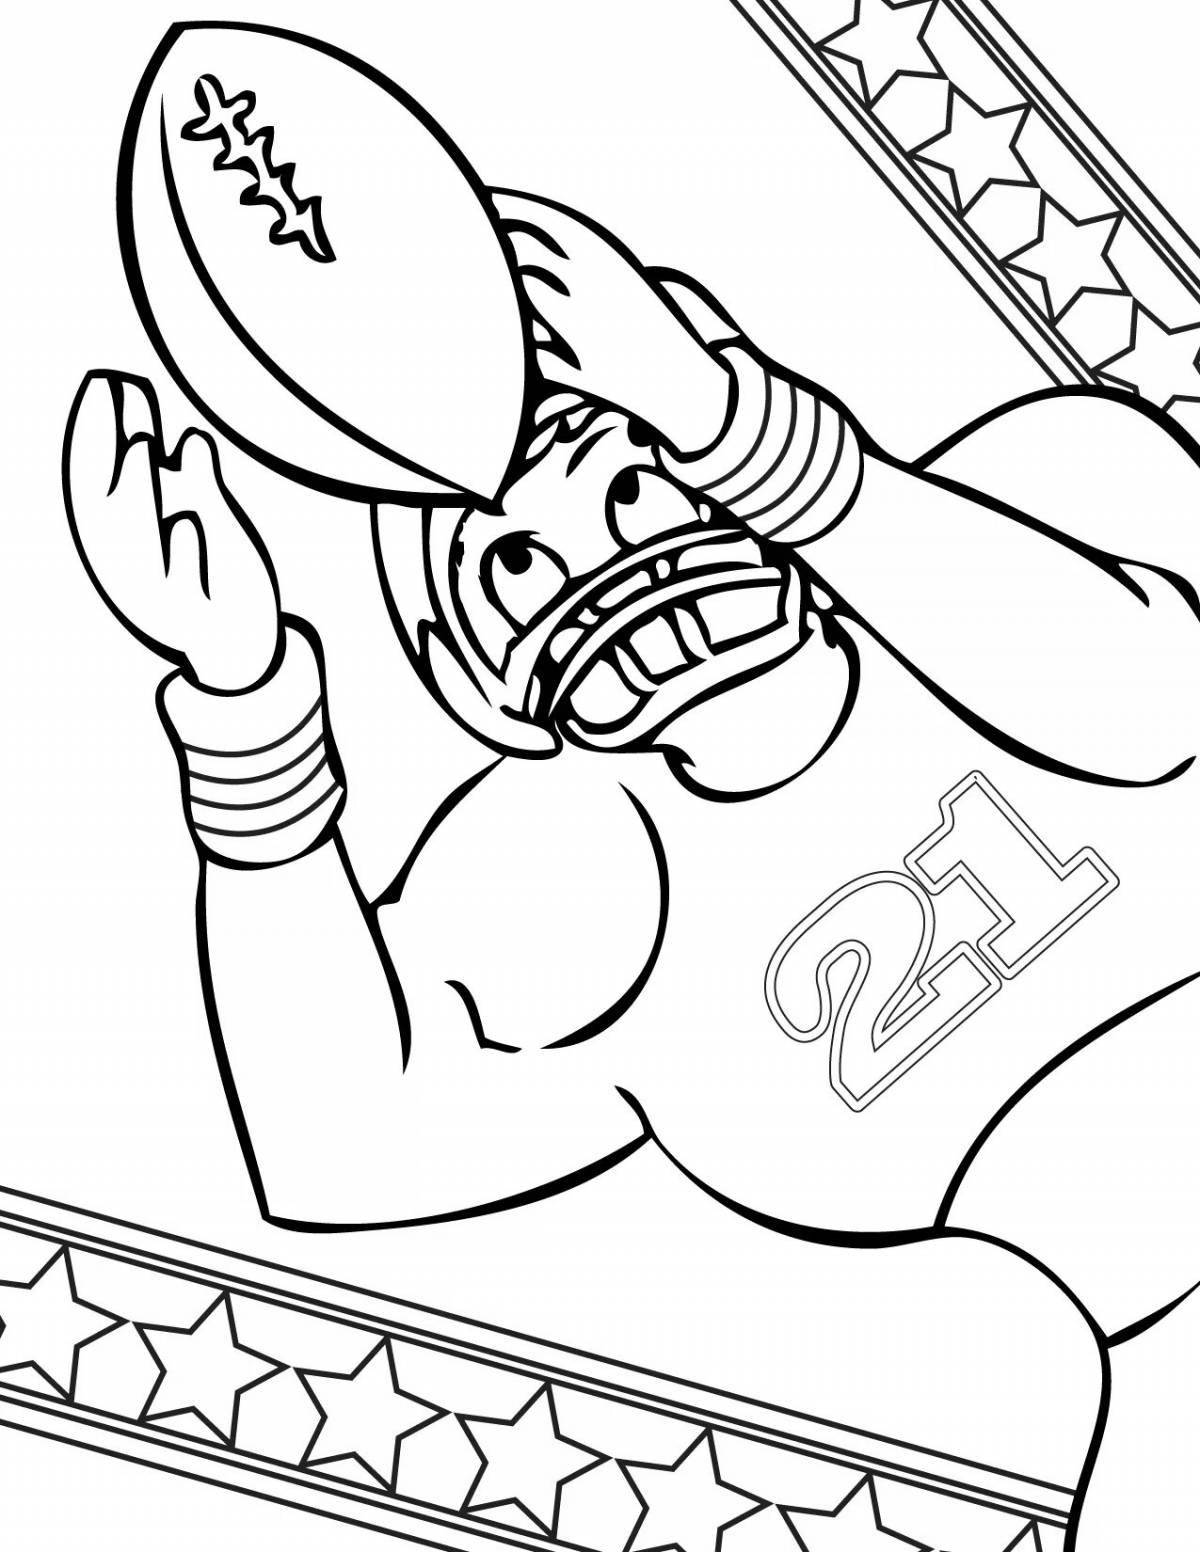 Brave athletes coloring pages for kids